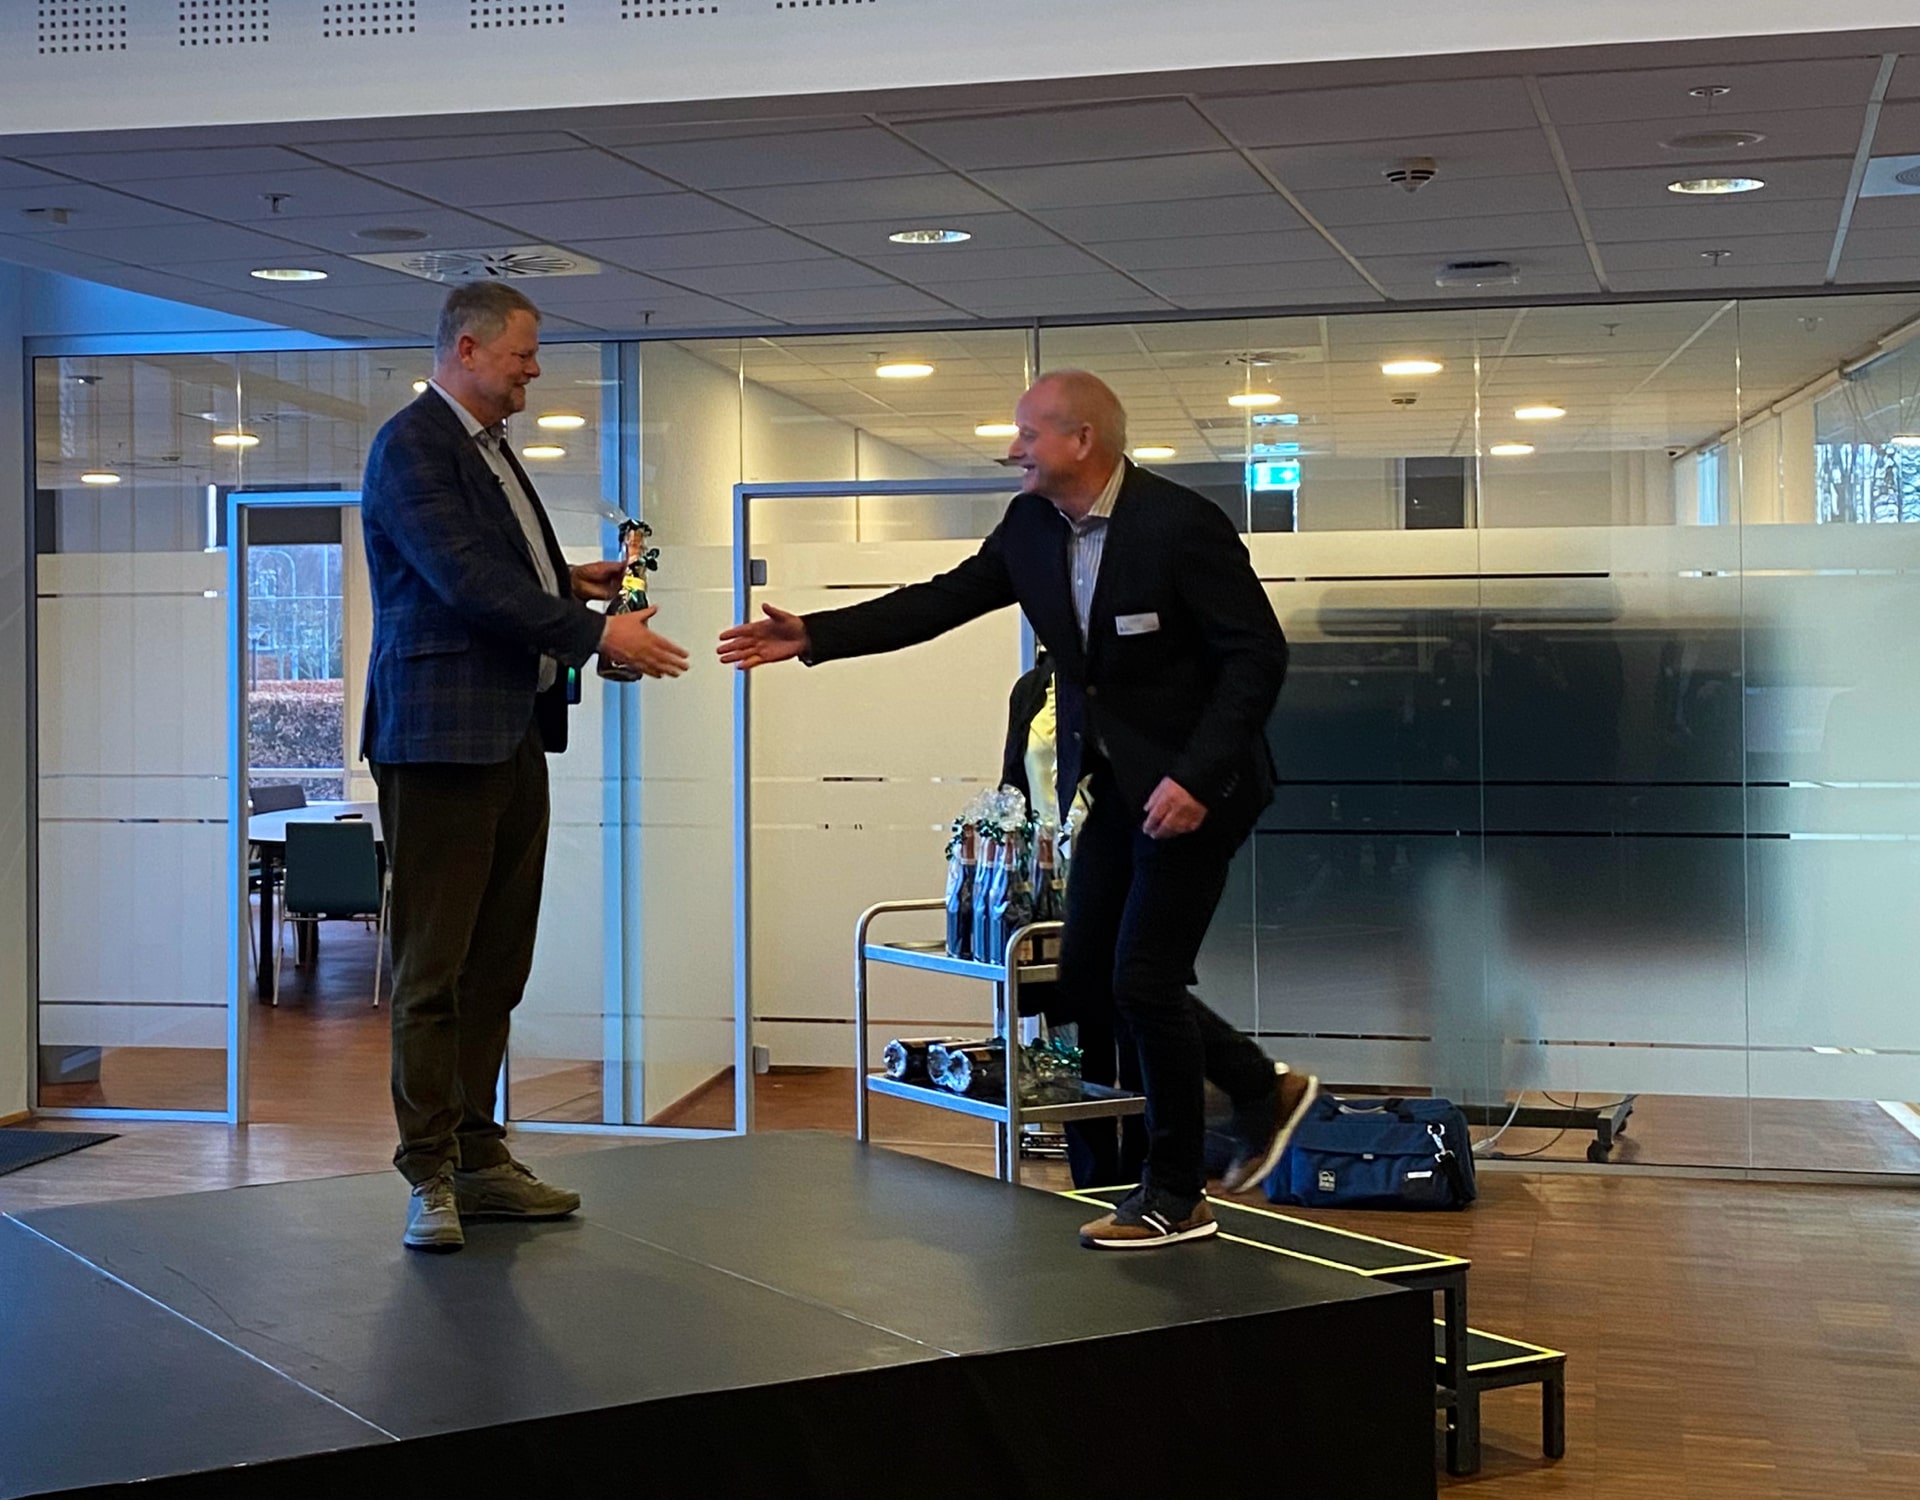 Momentum won second place in Roskilde Business Award 2022